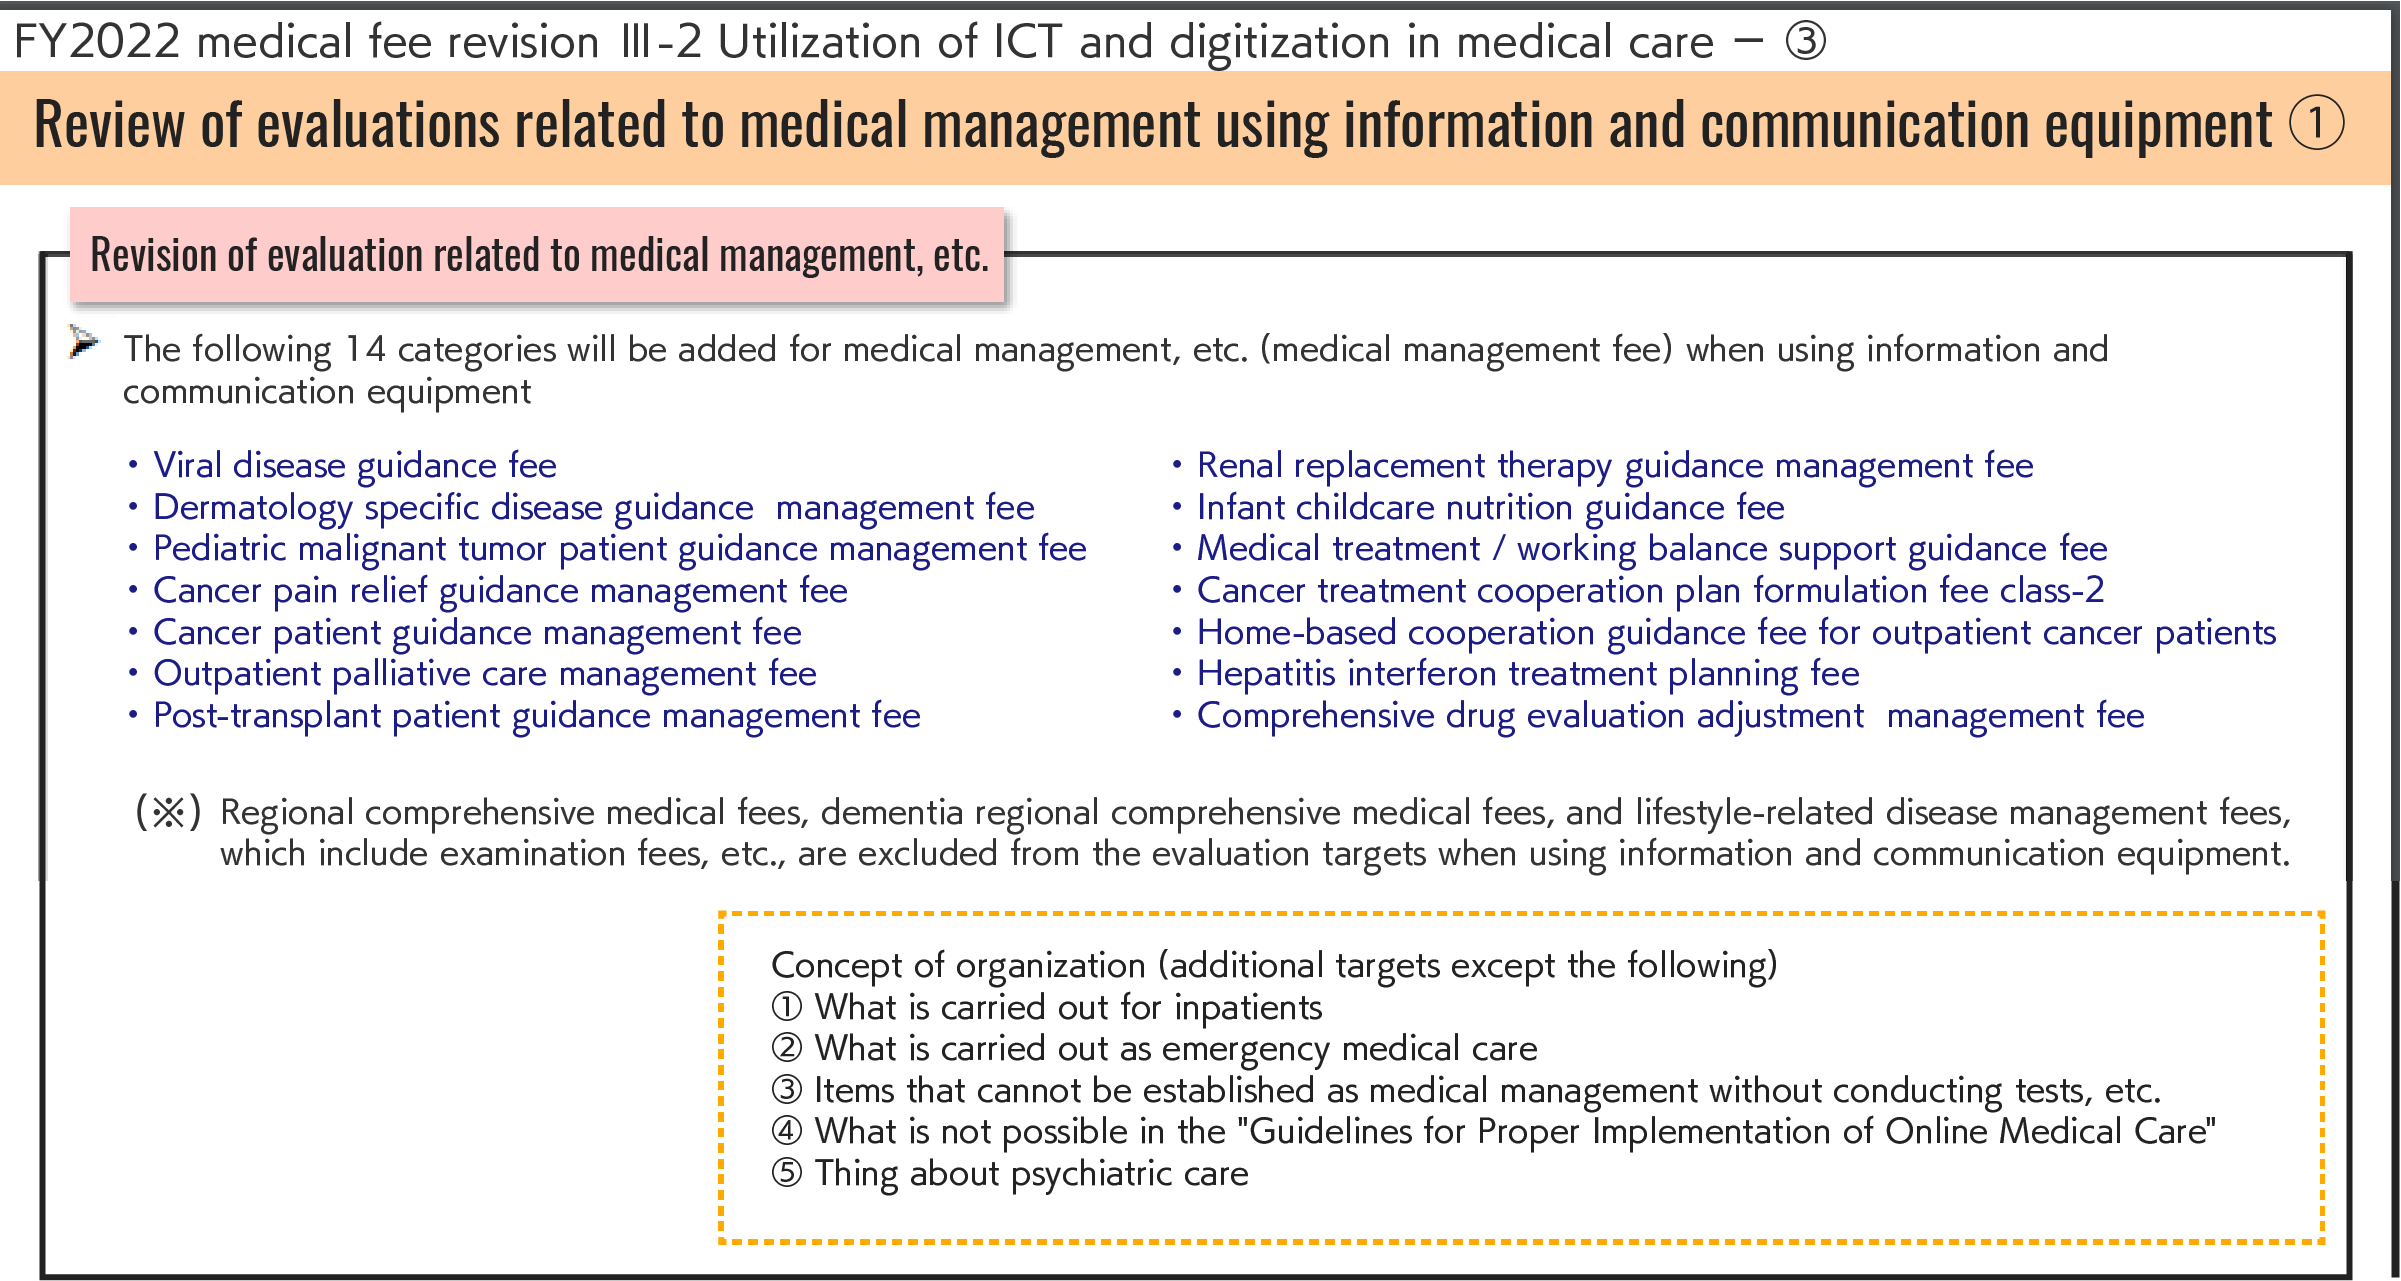 Review of evaluations related to medical management using information and communication equipment 1